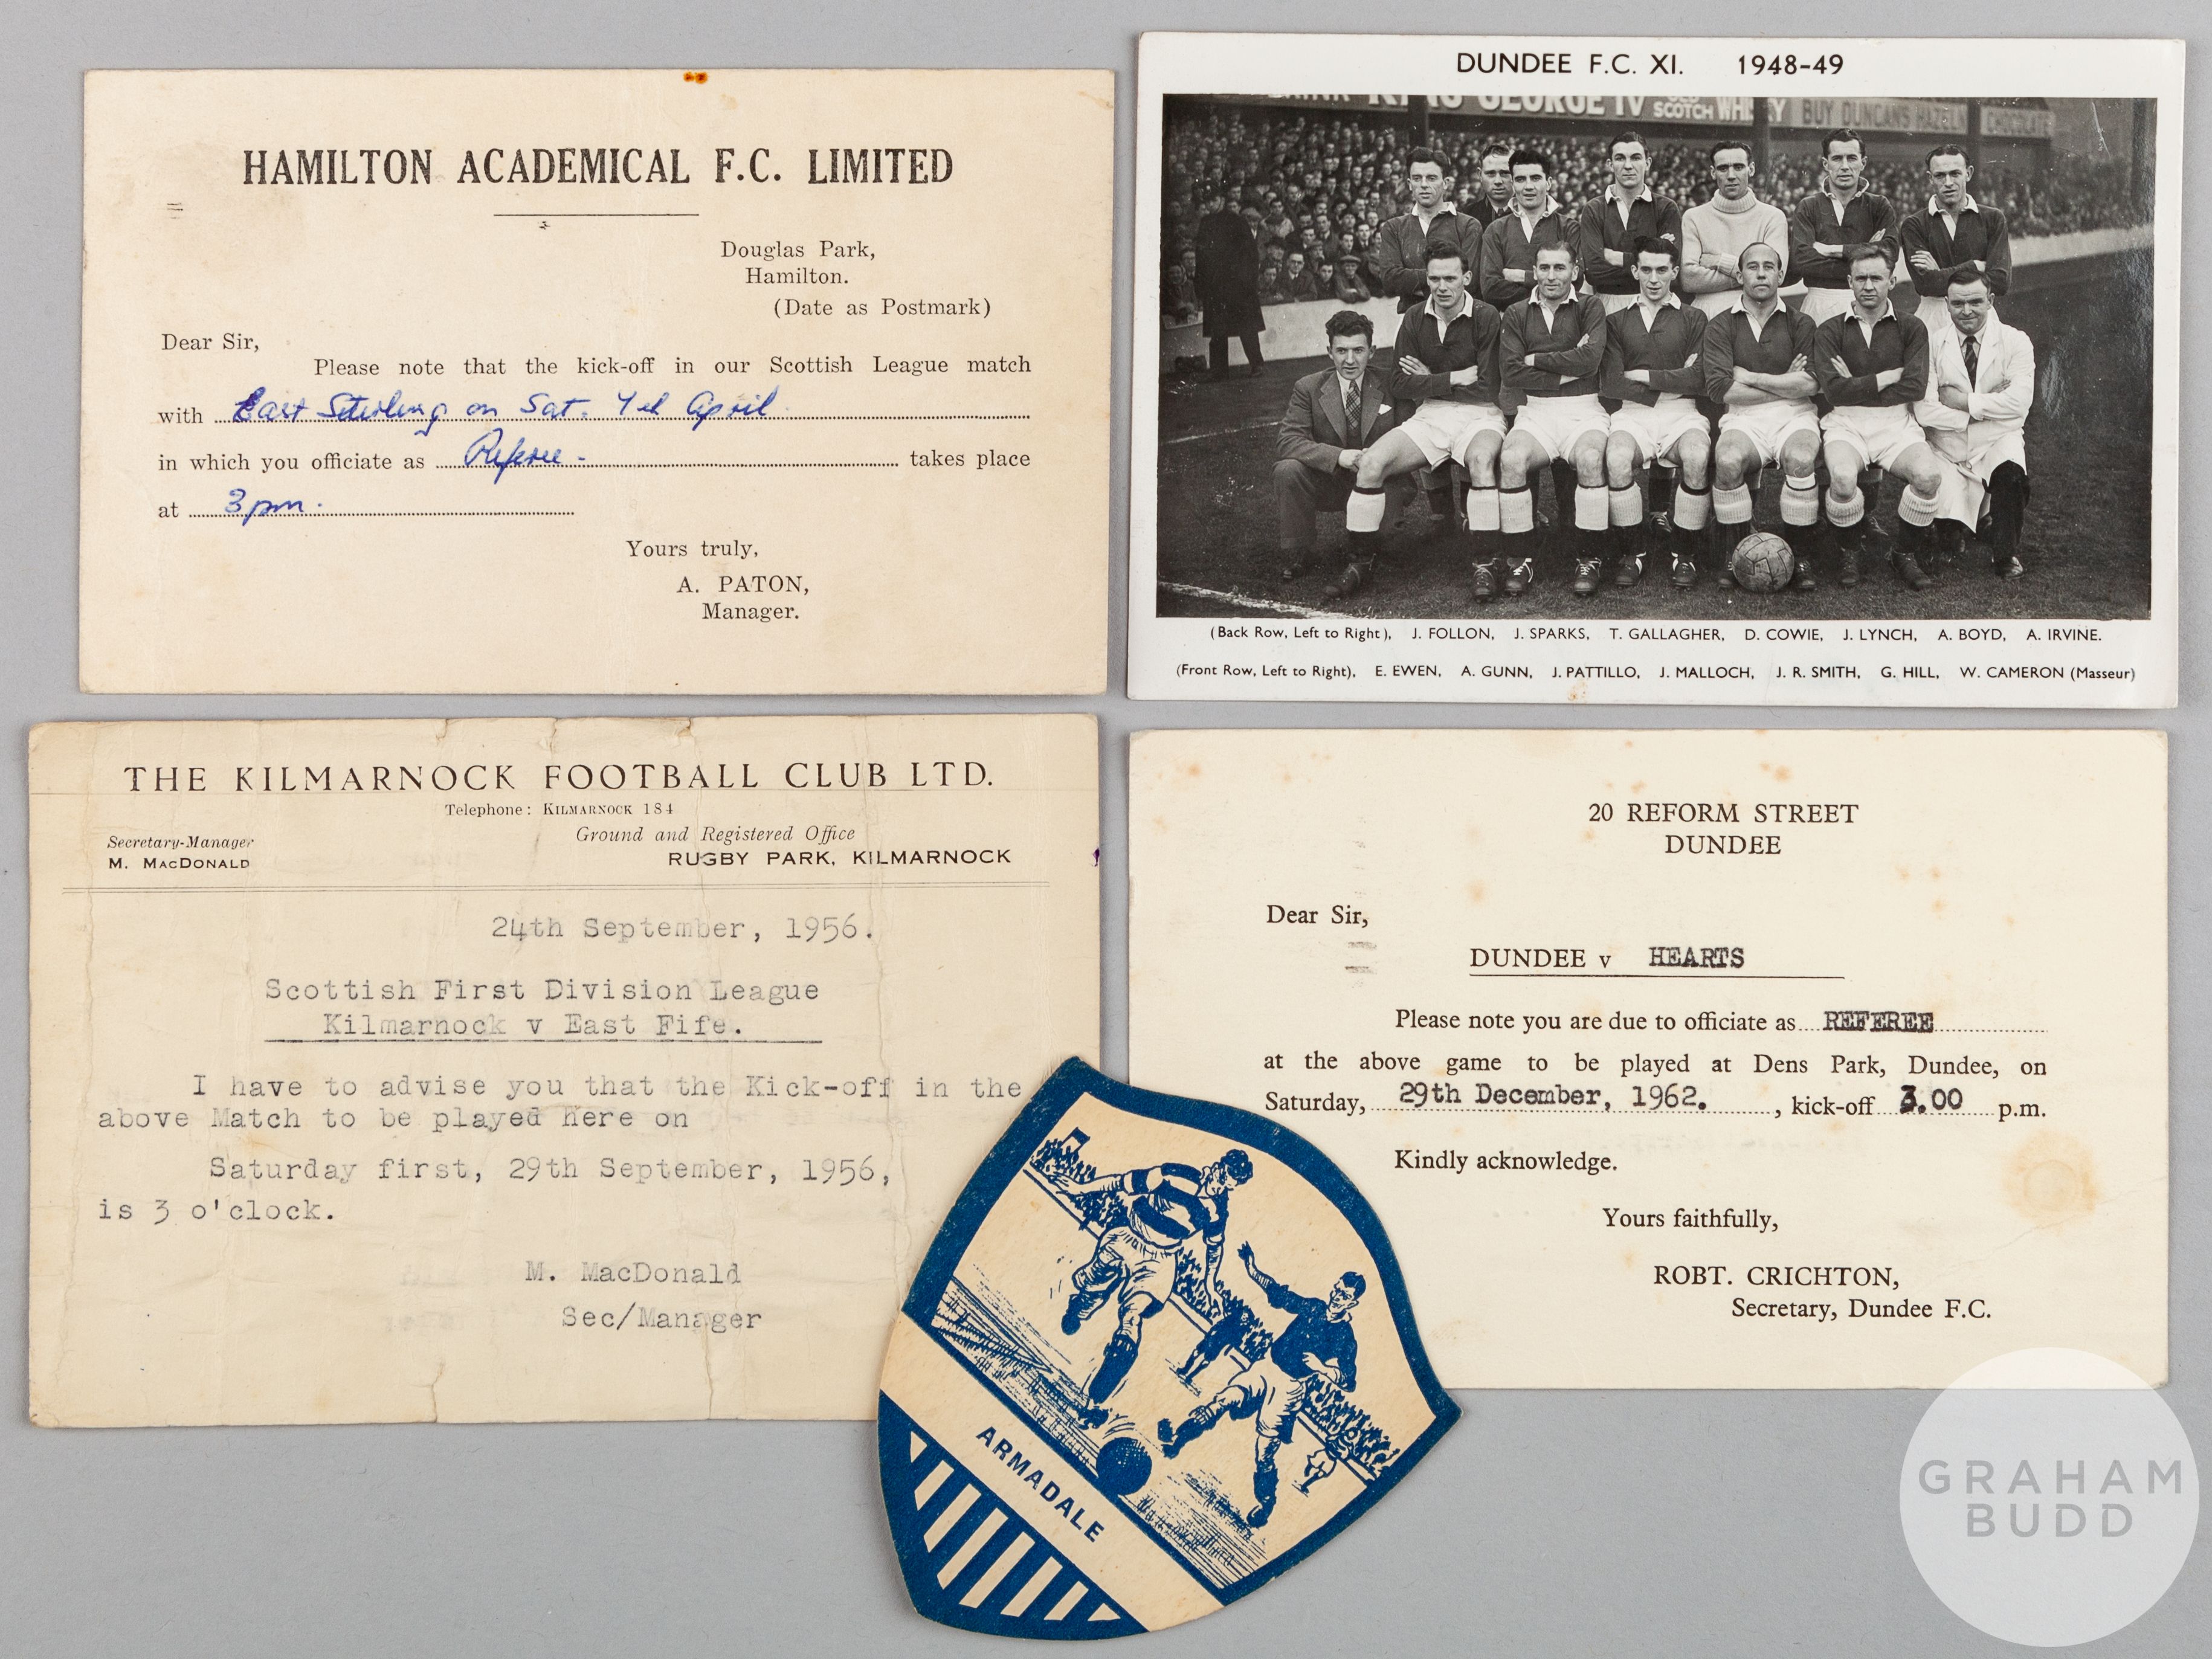 Dundee F.C. XI autographed black and white postcard, 1948-49